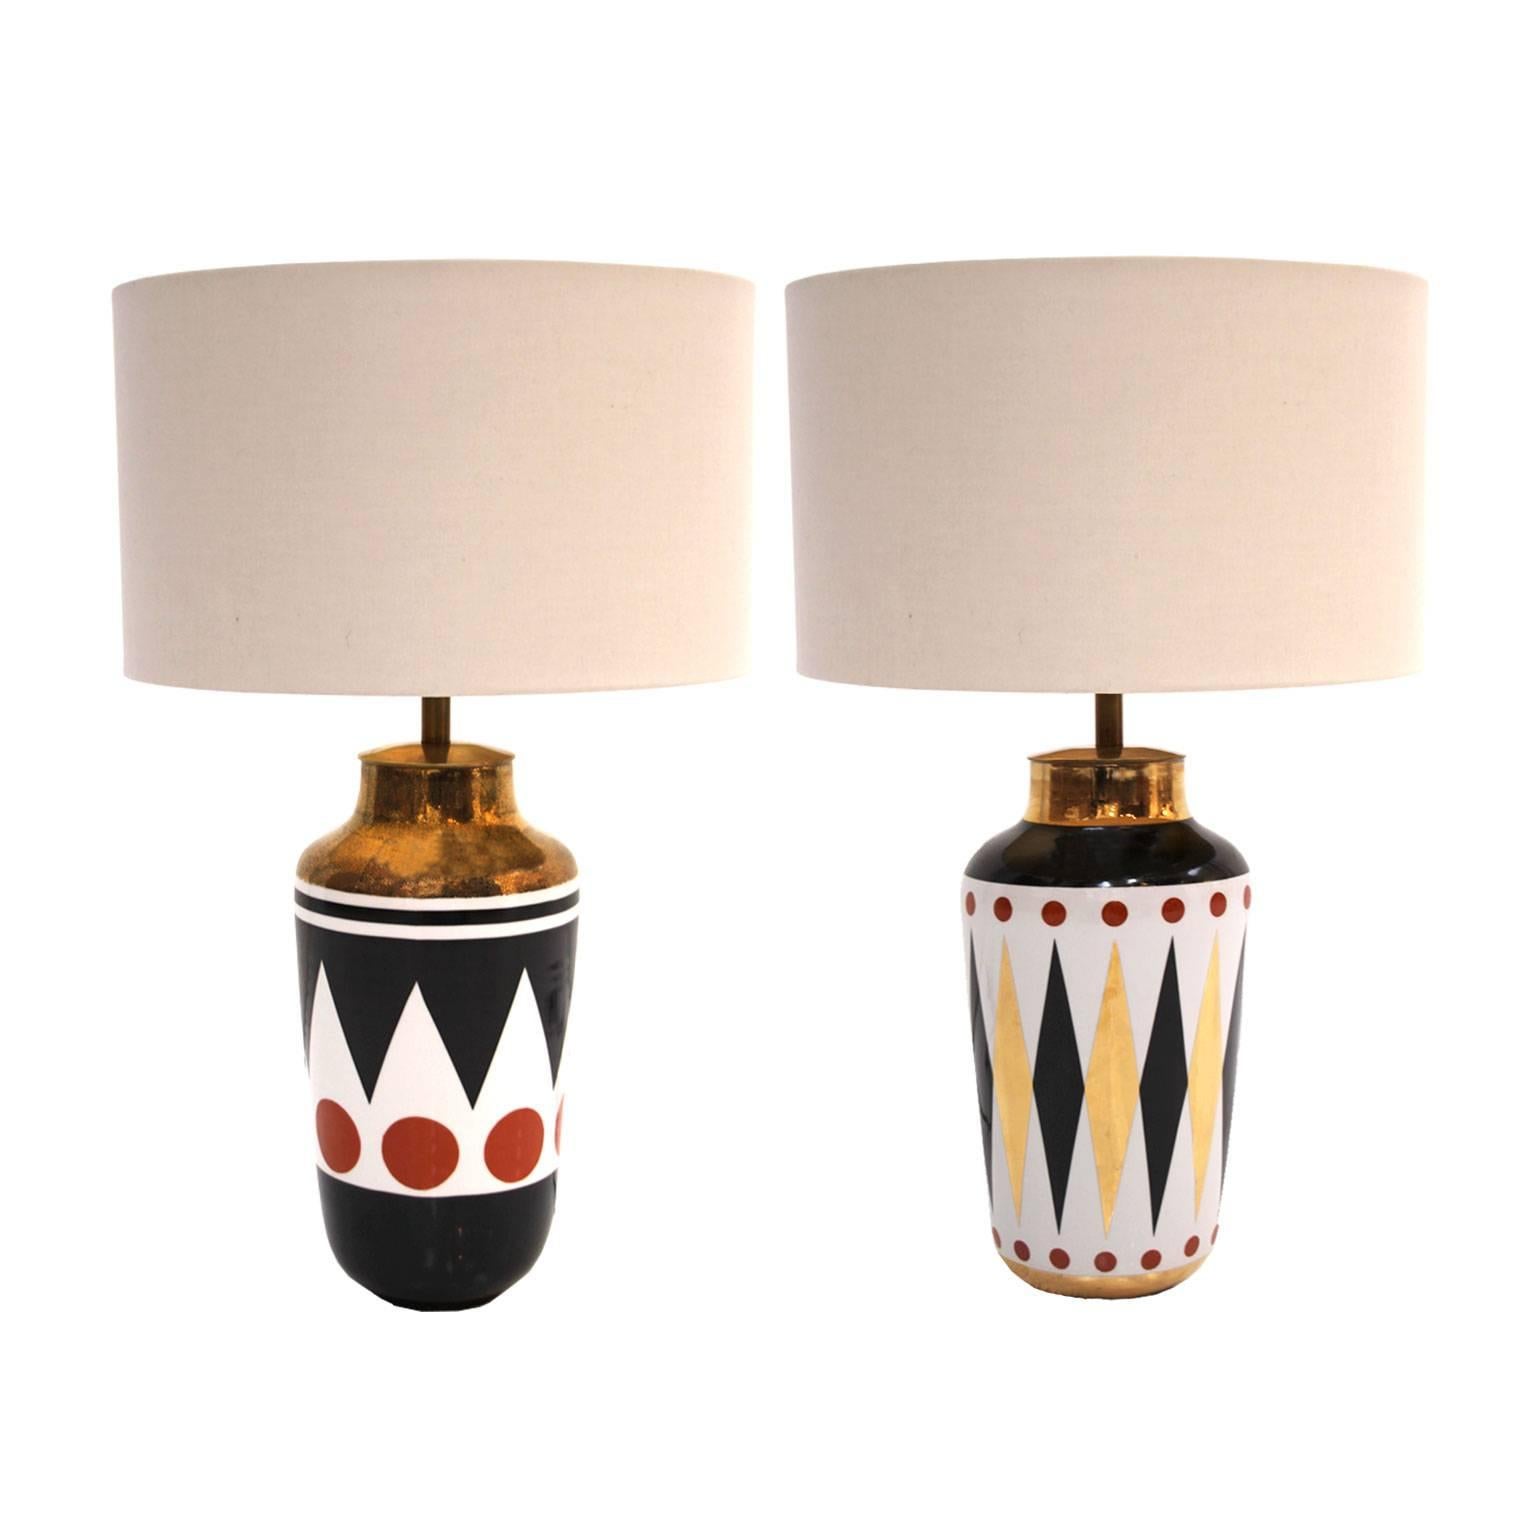 Pair of Table Lamps by Frederic de Lucas